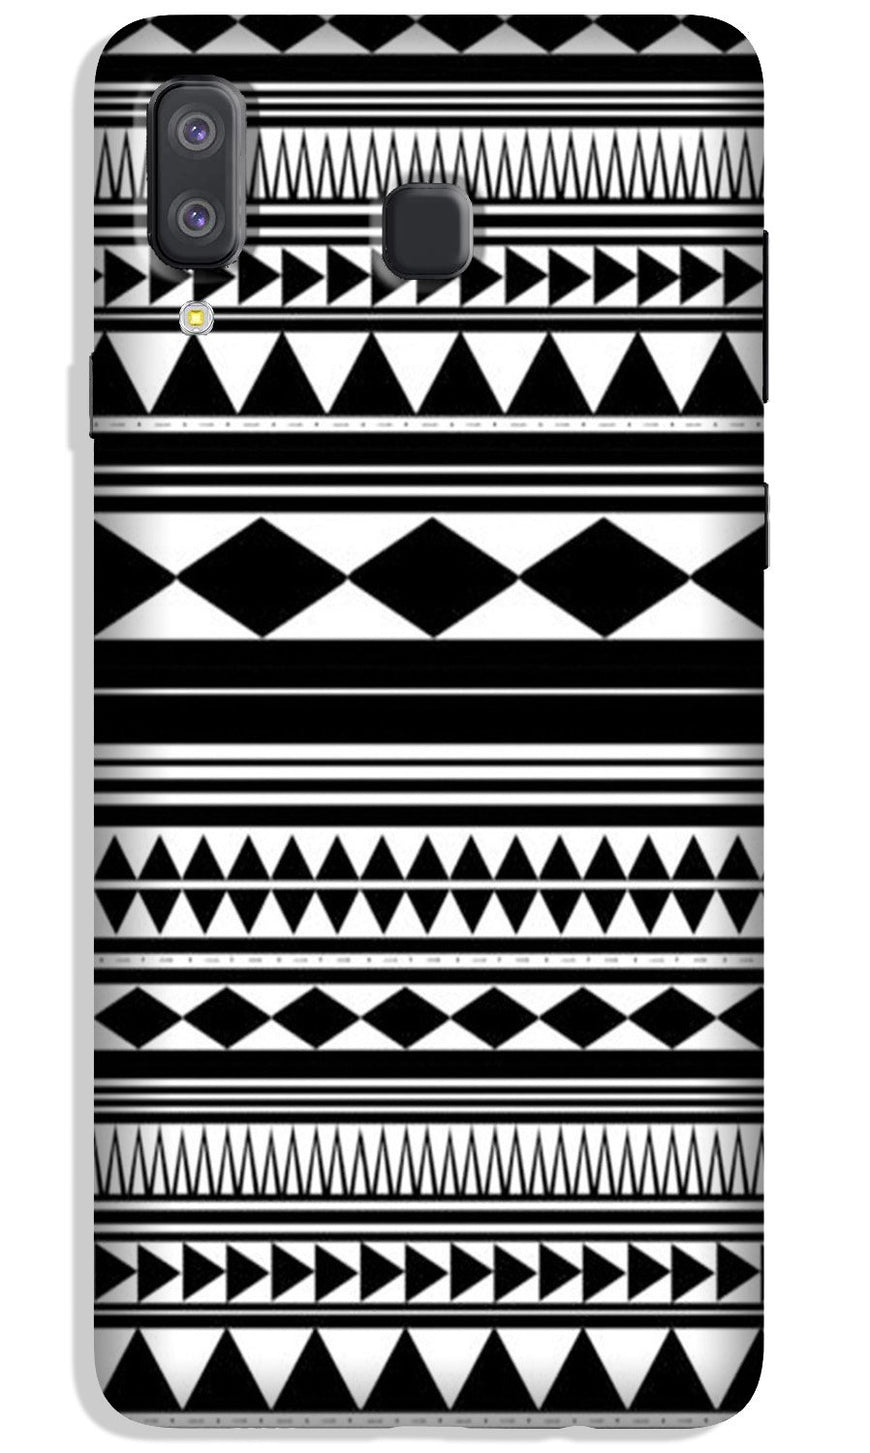 Black white Pattern Case for Galaxy A8 Star